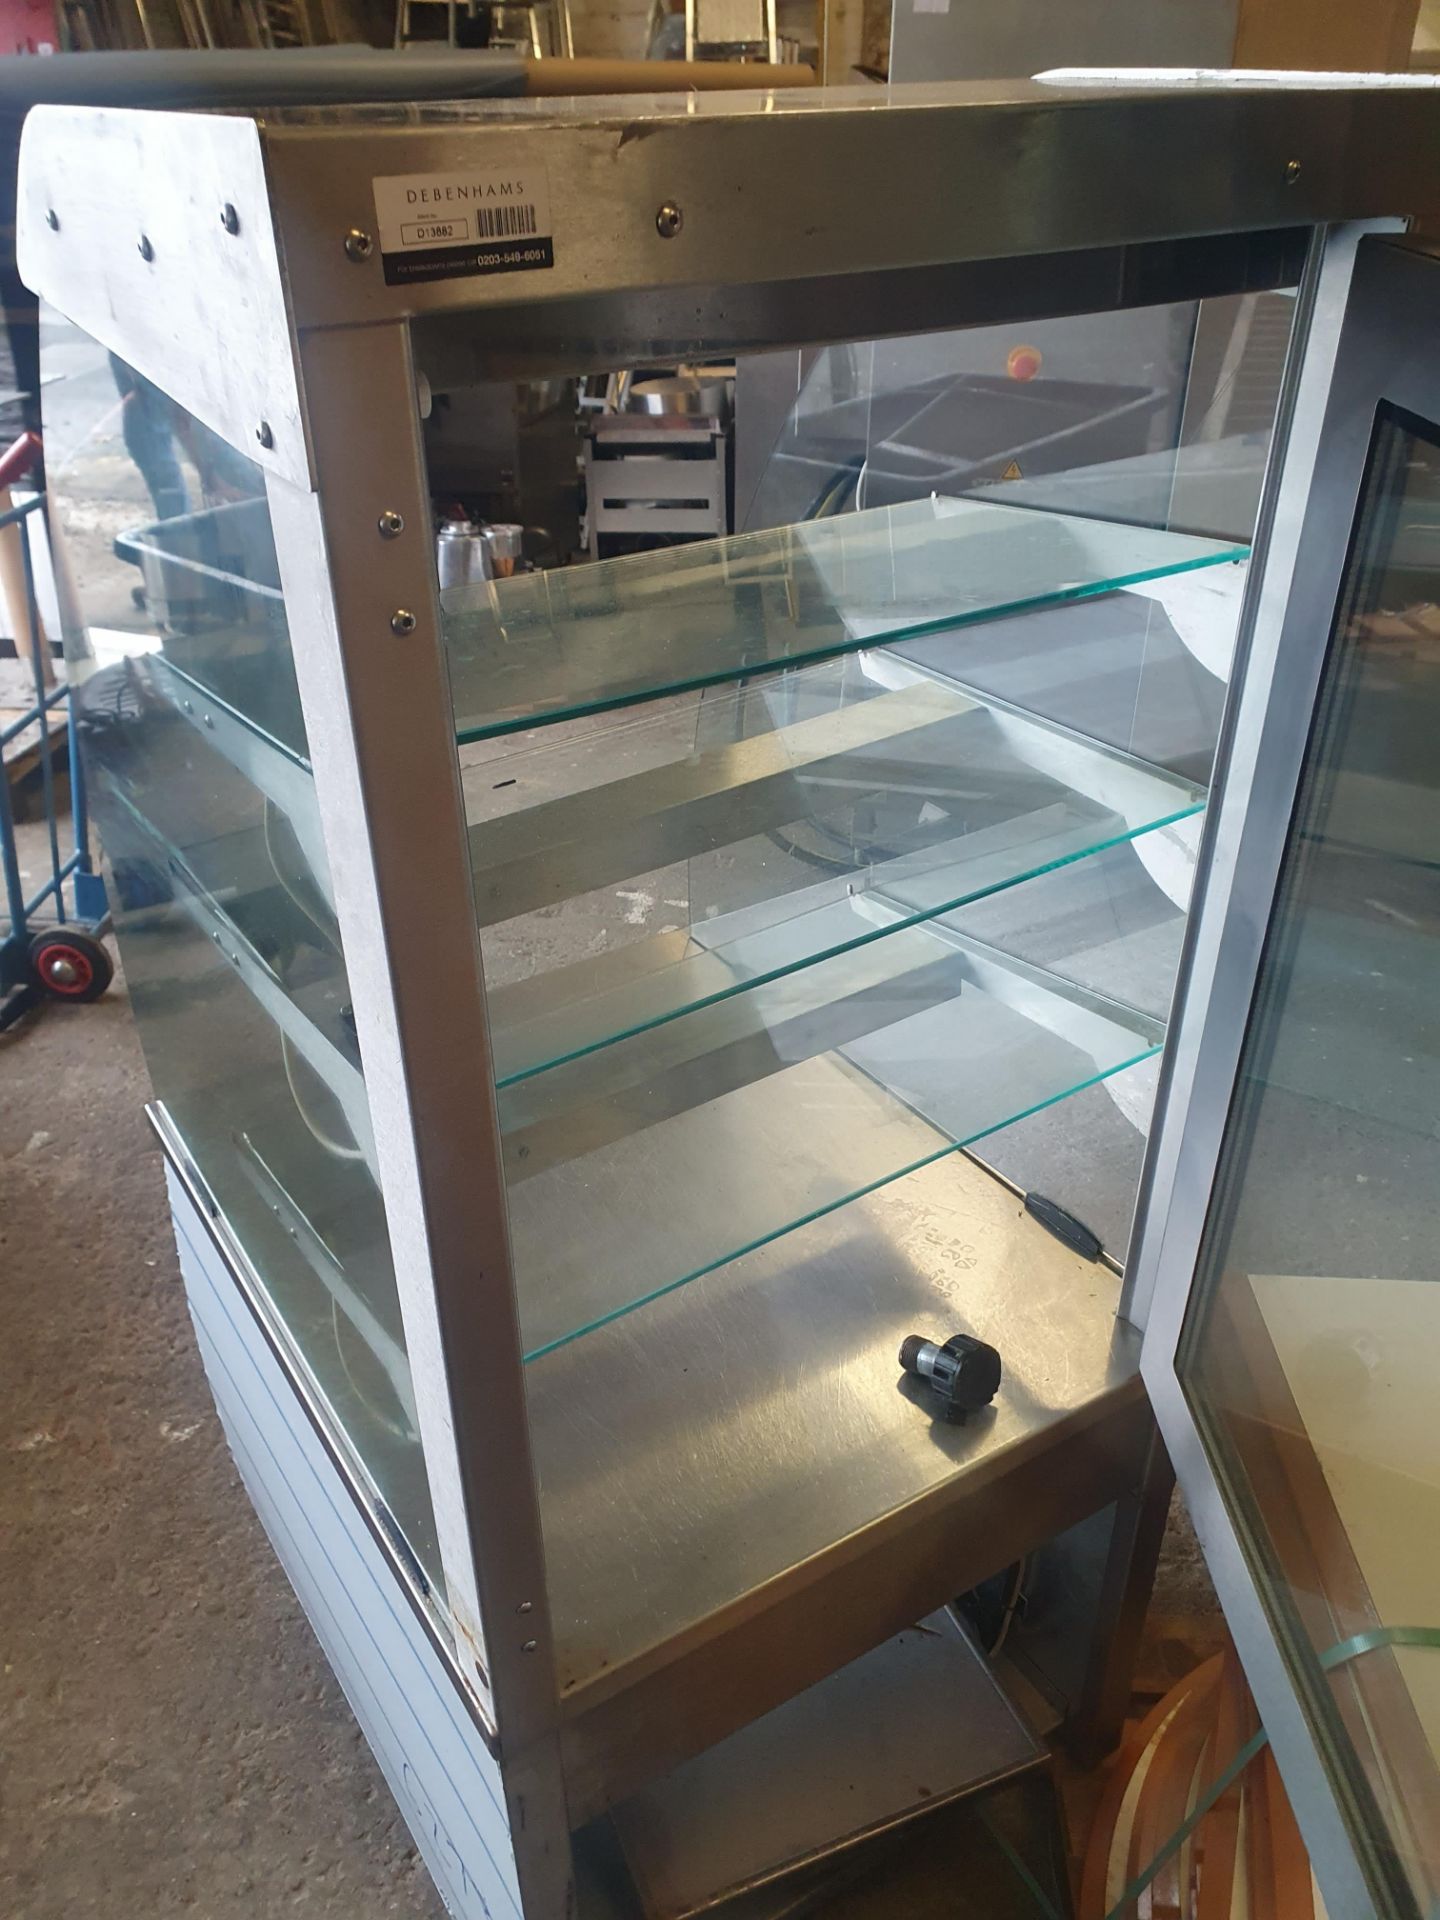 Counterline Rear Loading Patisserie Ambient Display Unit - Image 3 of 4